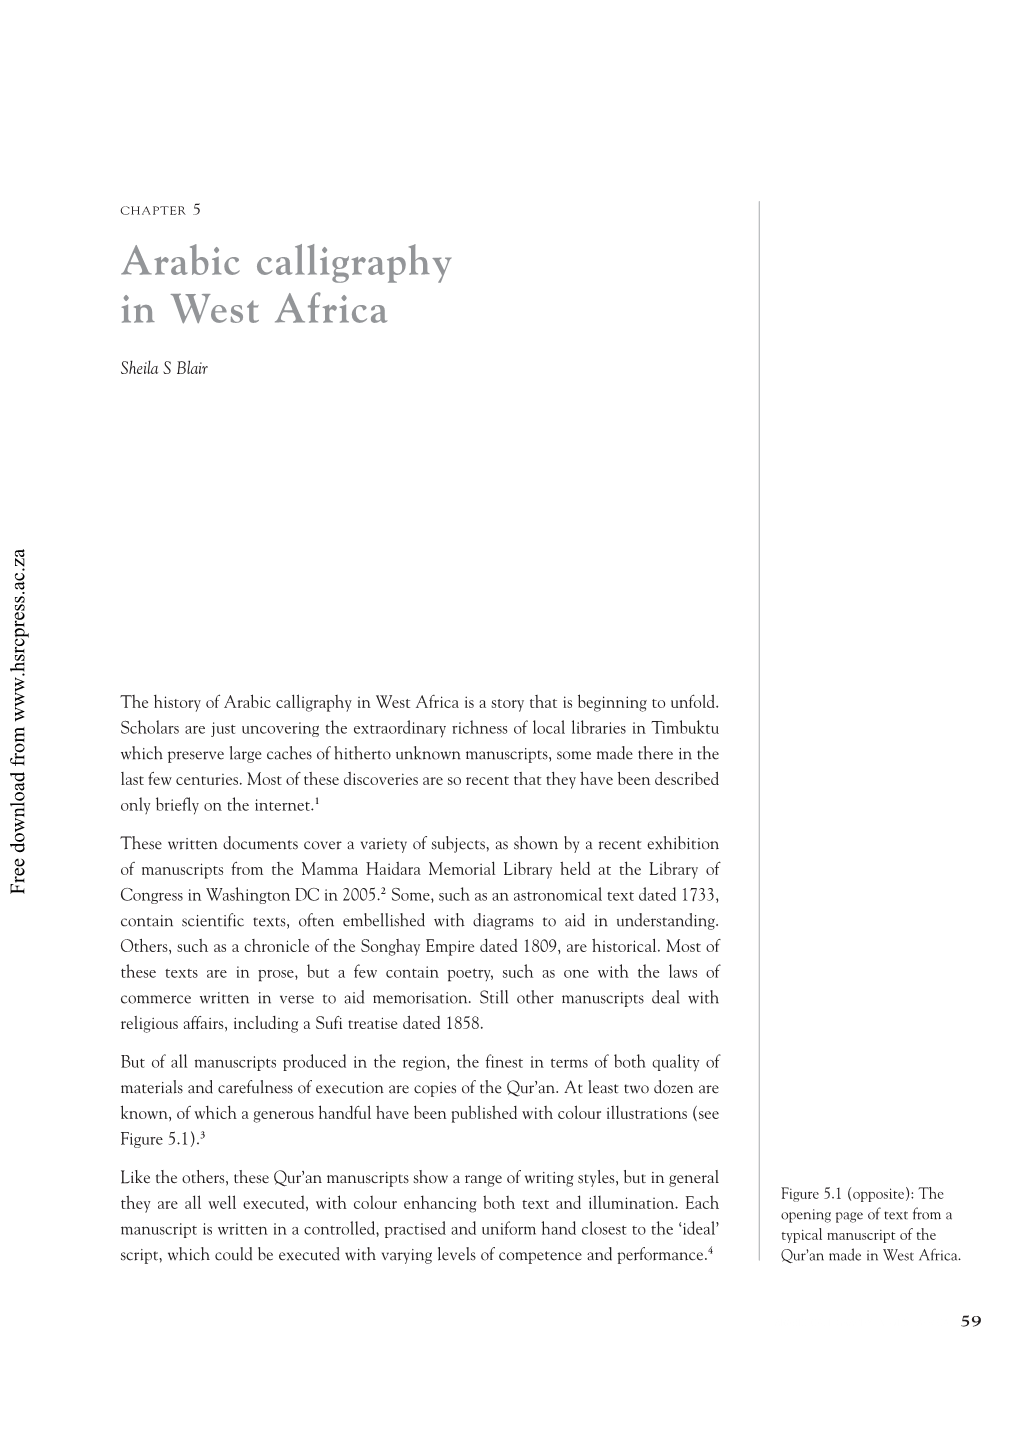 Arabic Calligraphy in West Africa